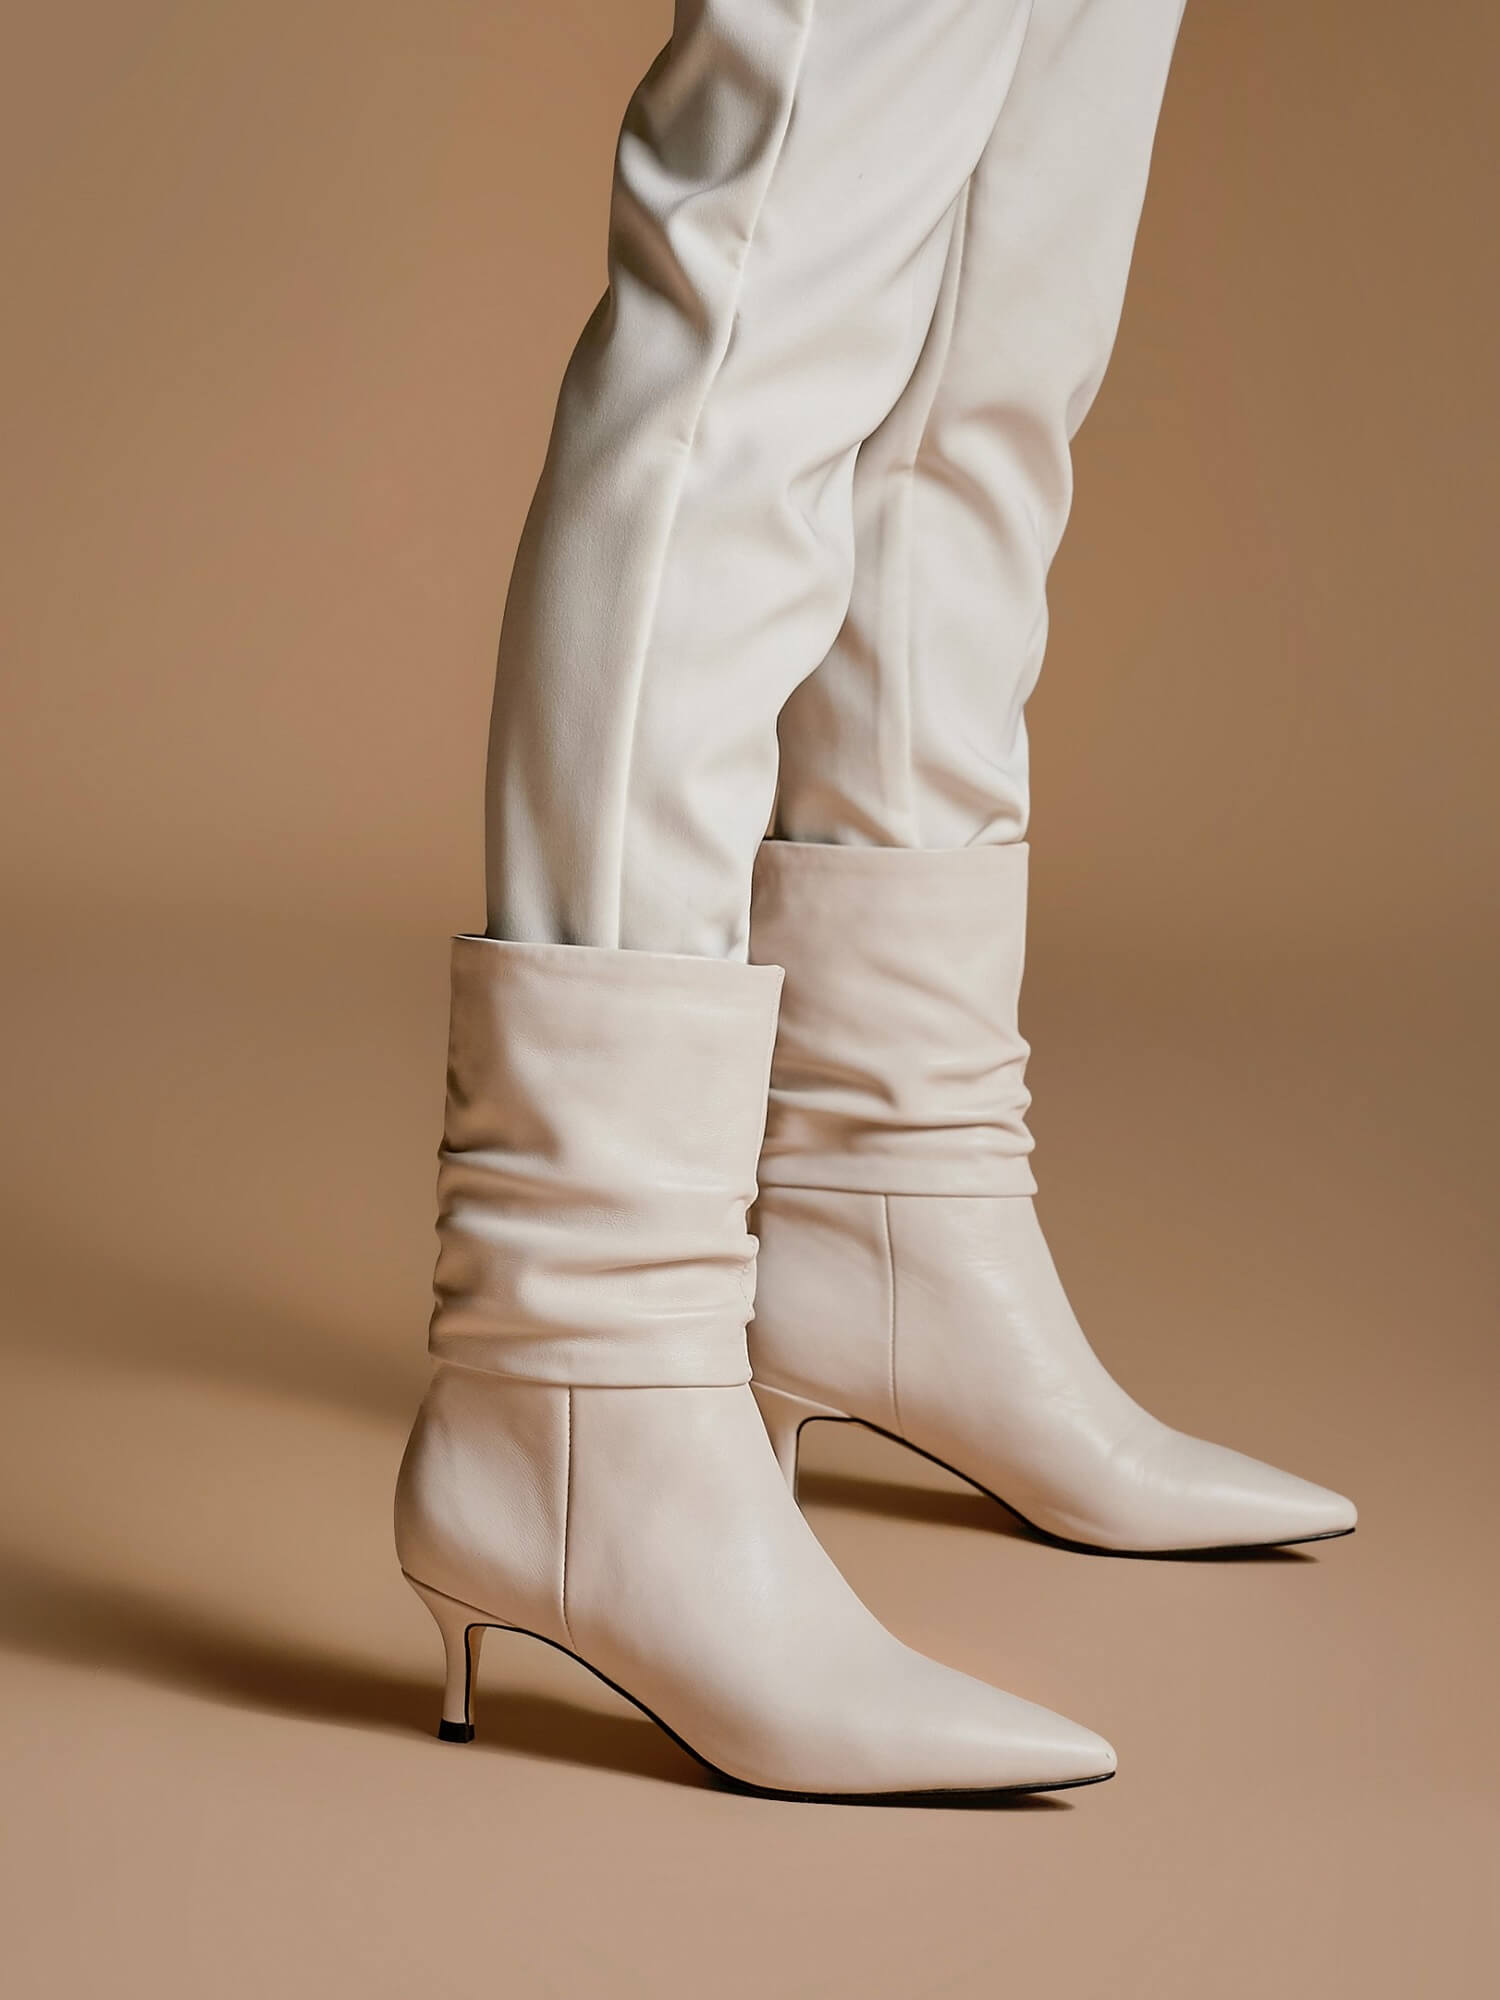 ROLISA-Milo-Slouchy-Ruched-Leather-Kitten-Heels-Mid-Calf-Boots-White-Model-3